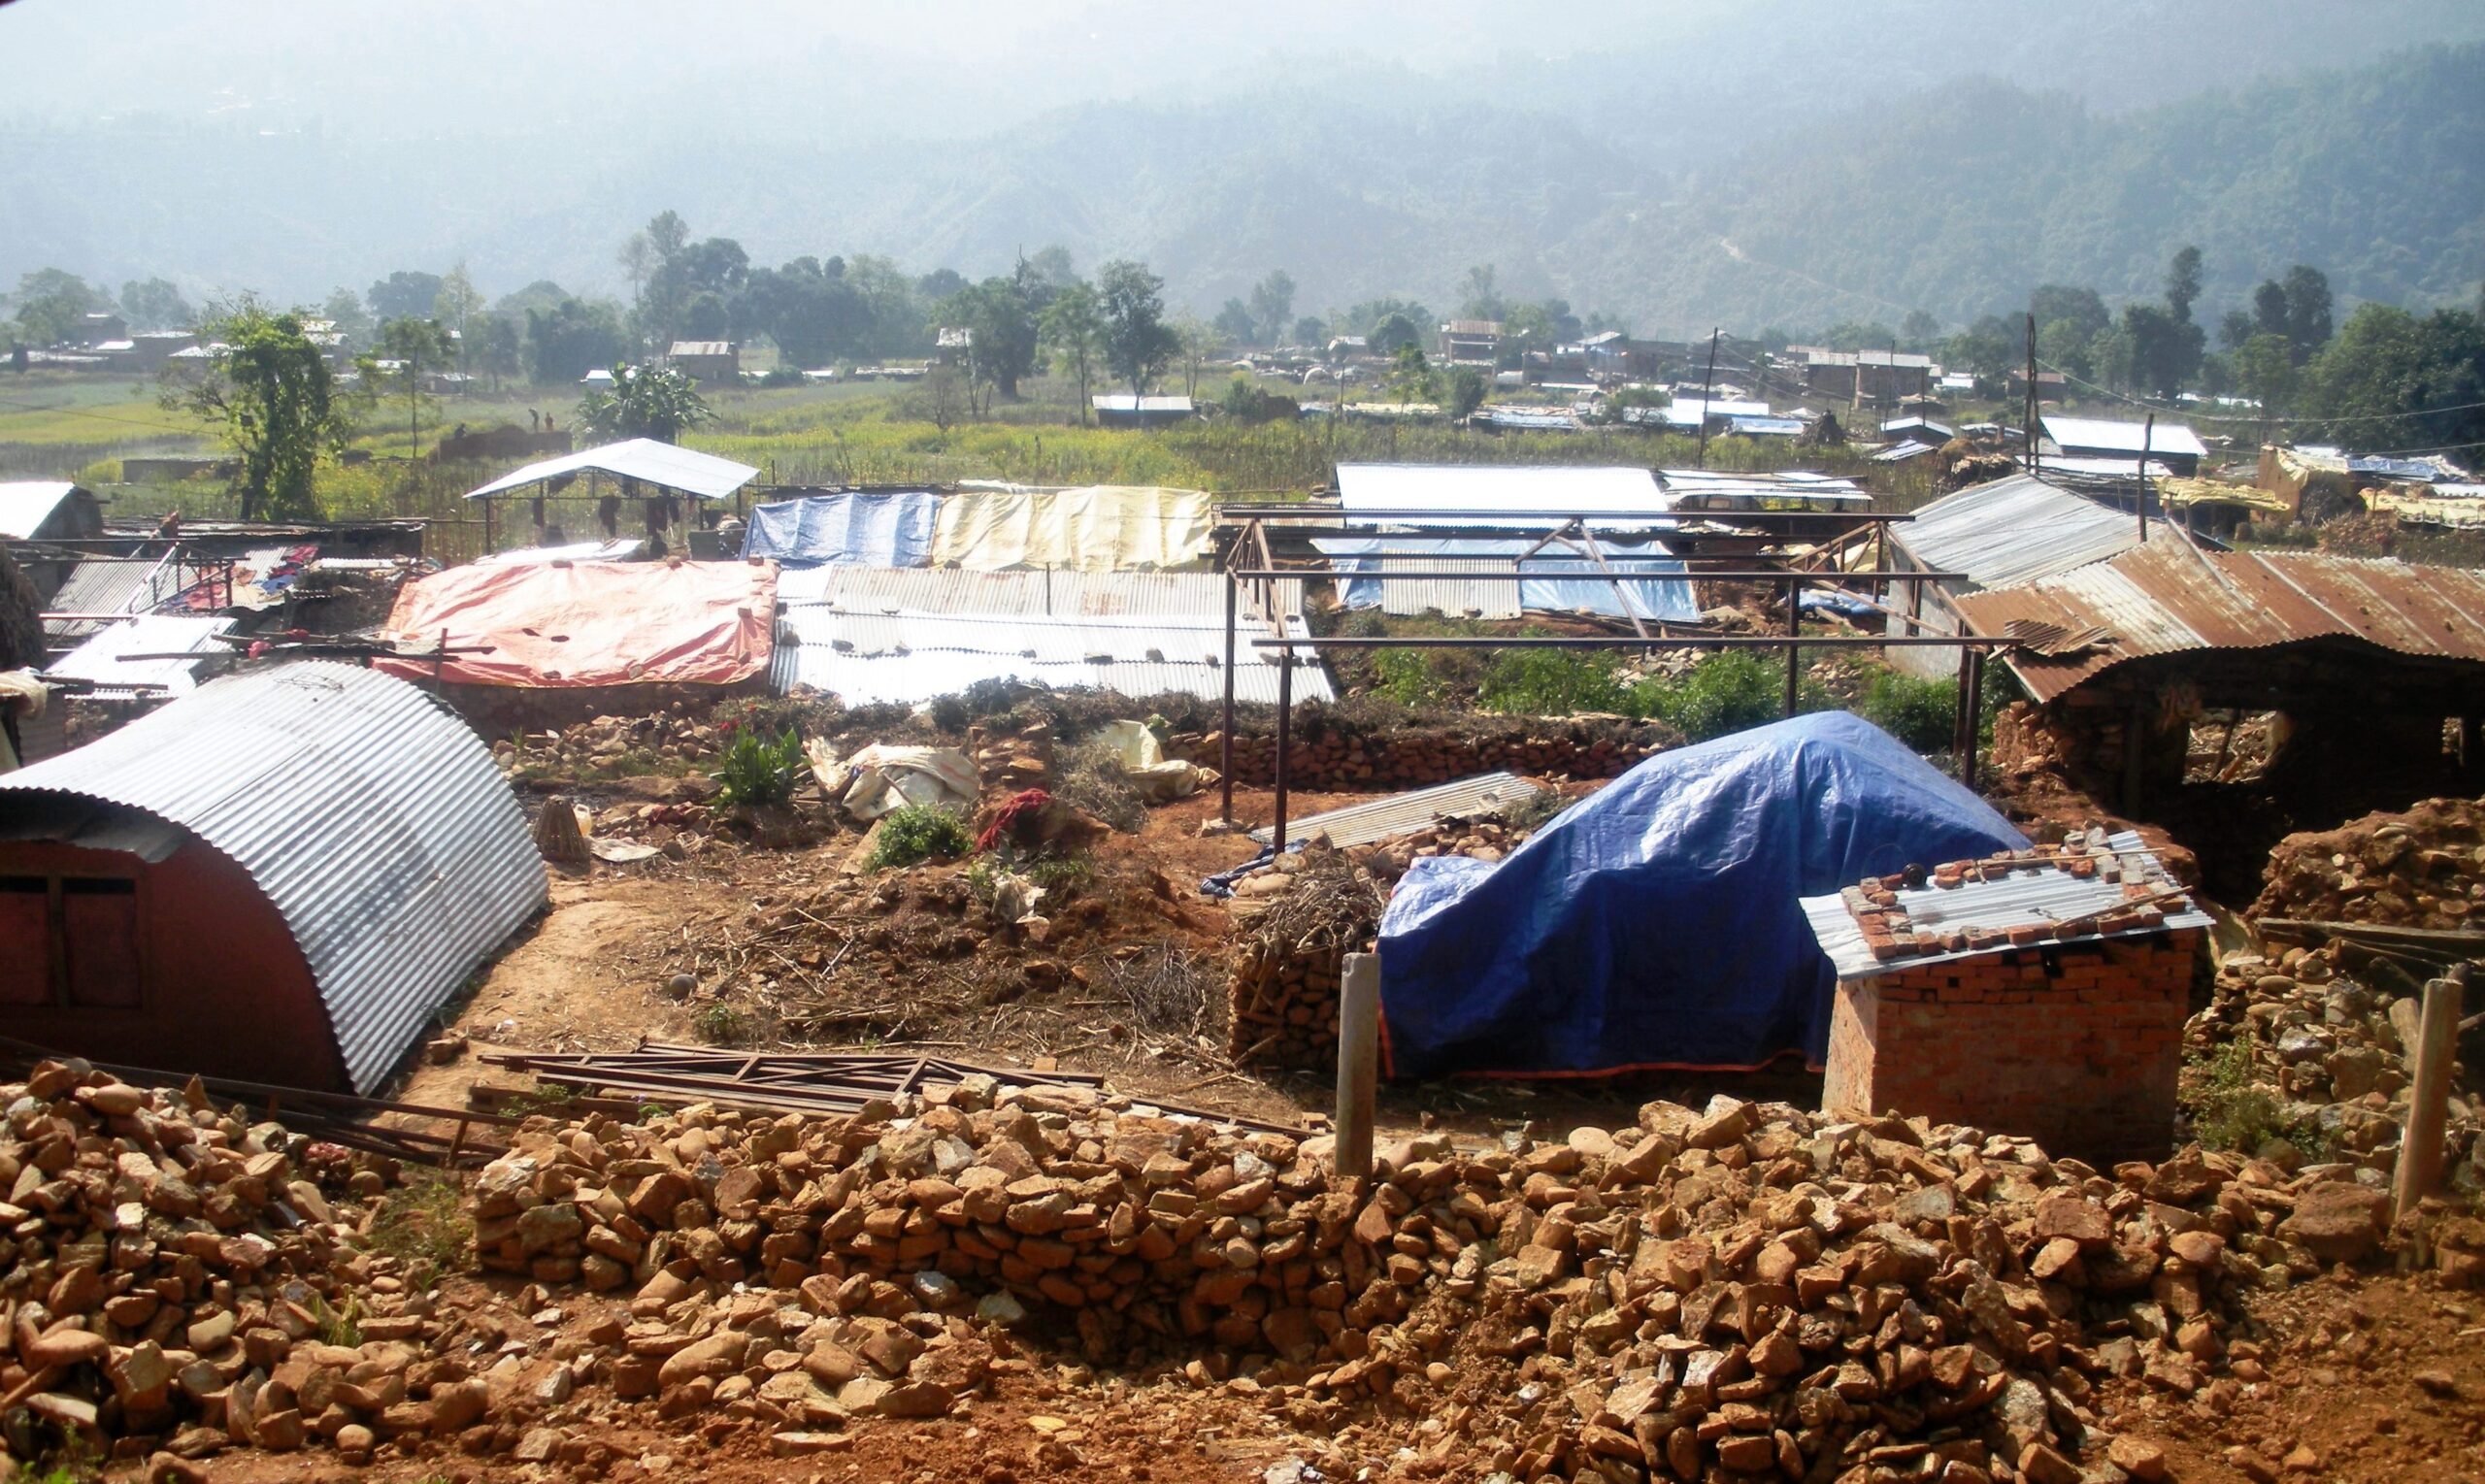 The view of Majhi community after the earthquake in 2015